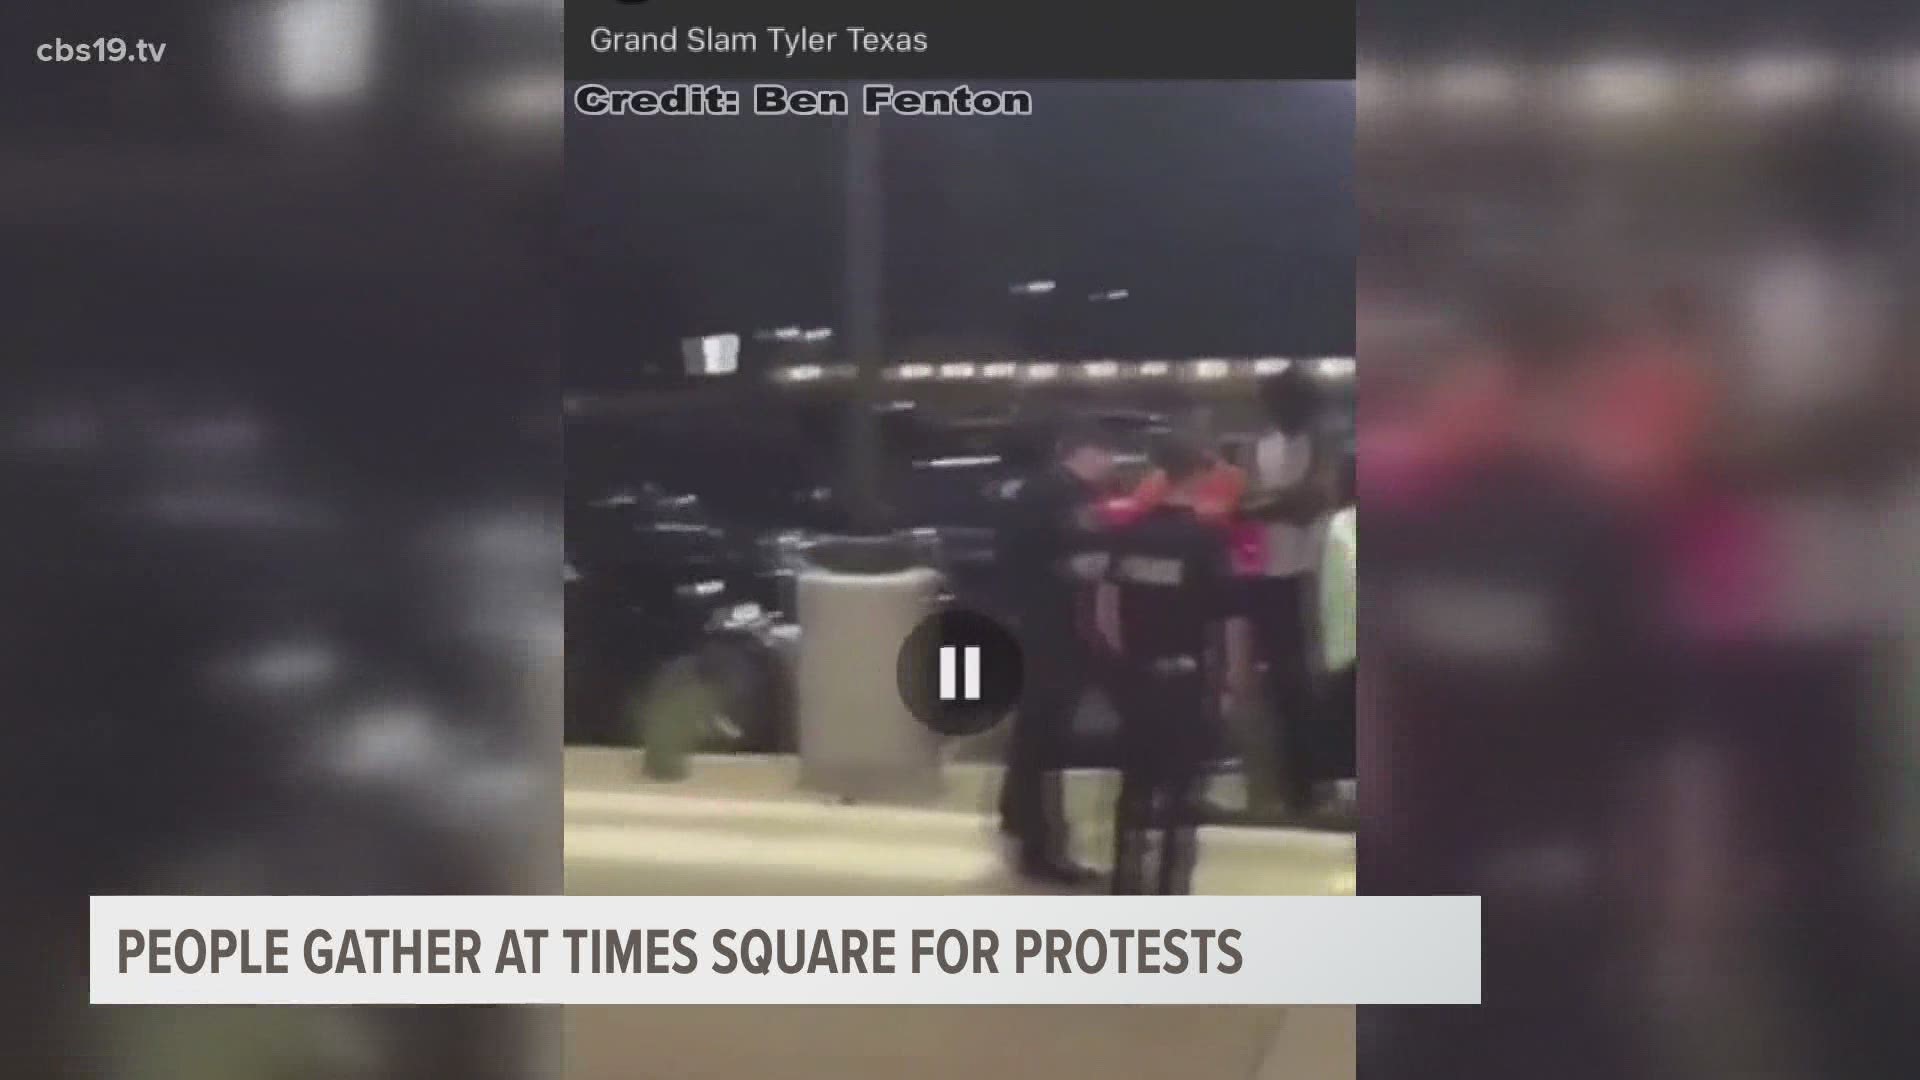 Video shows off-duty Bullard police officers slamming a Black teenager to the ground outside Times Square Grand Slam in Tyler on Saturday.